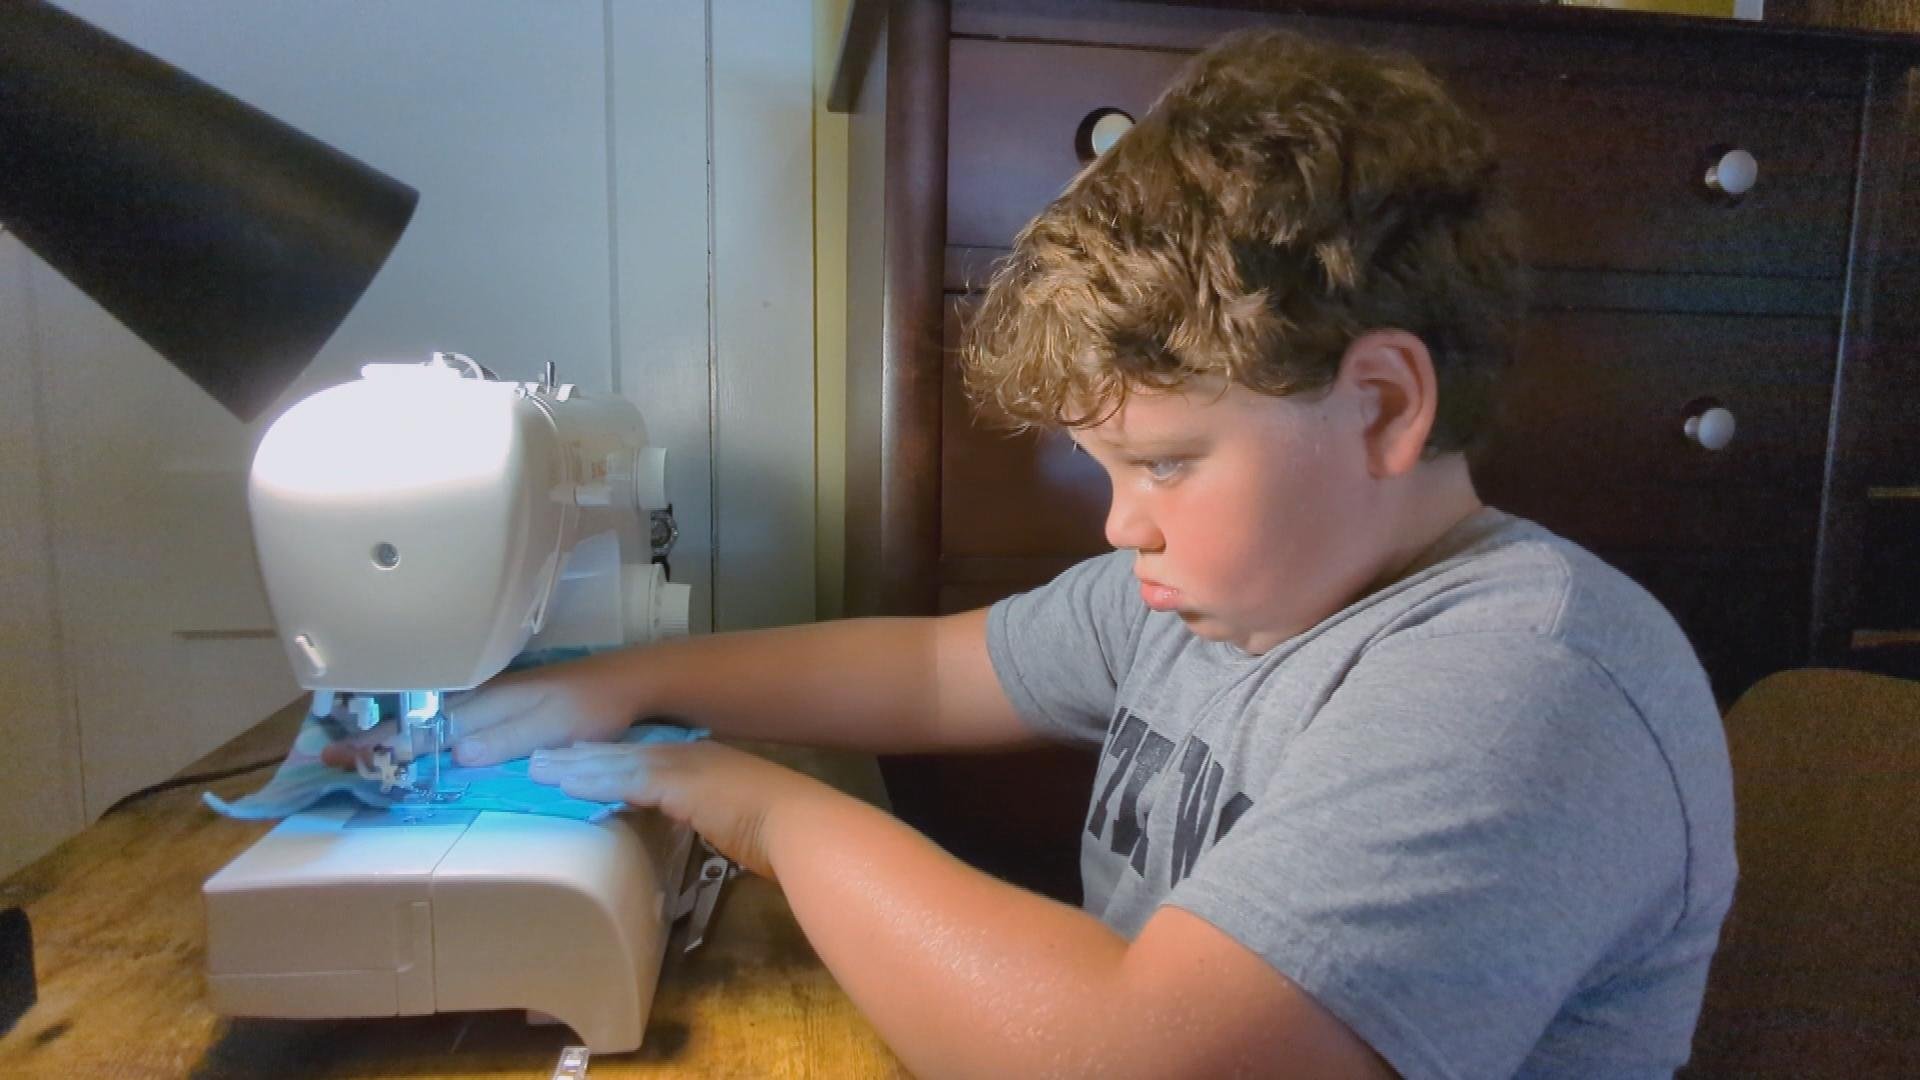 9-Year-Old Boy Whose Love of Sewing Went Viral Is Teaching Us